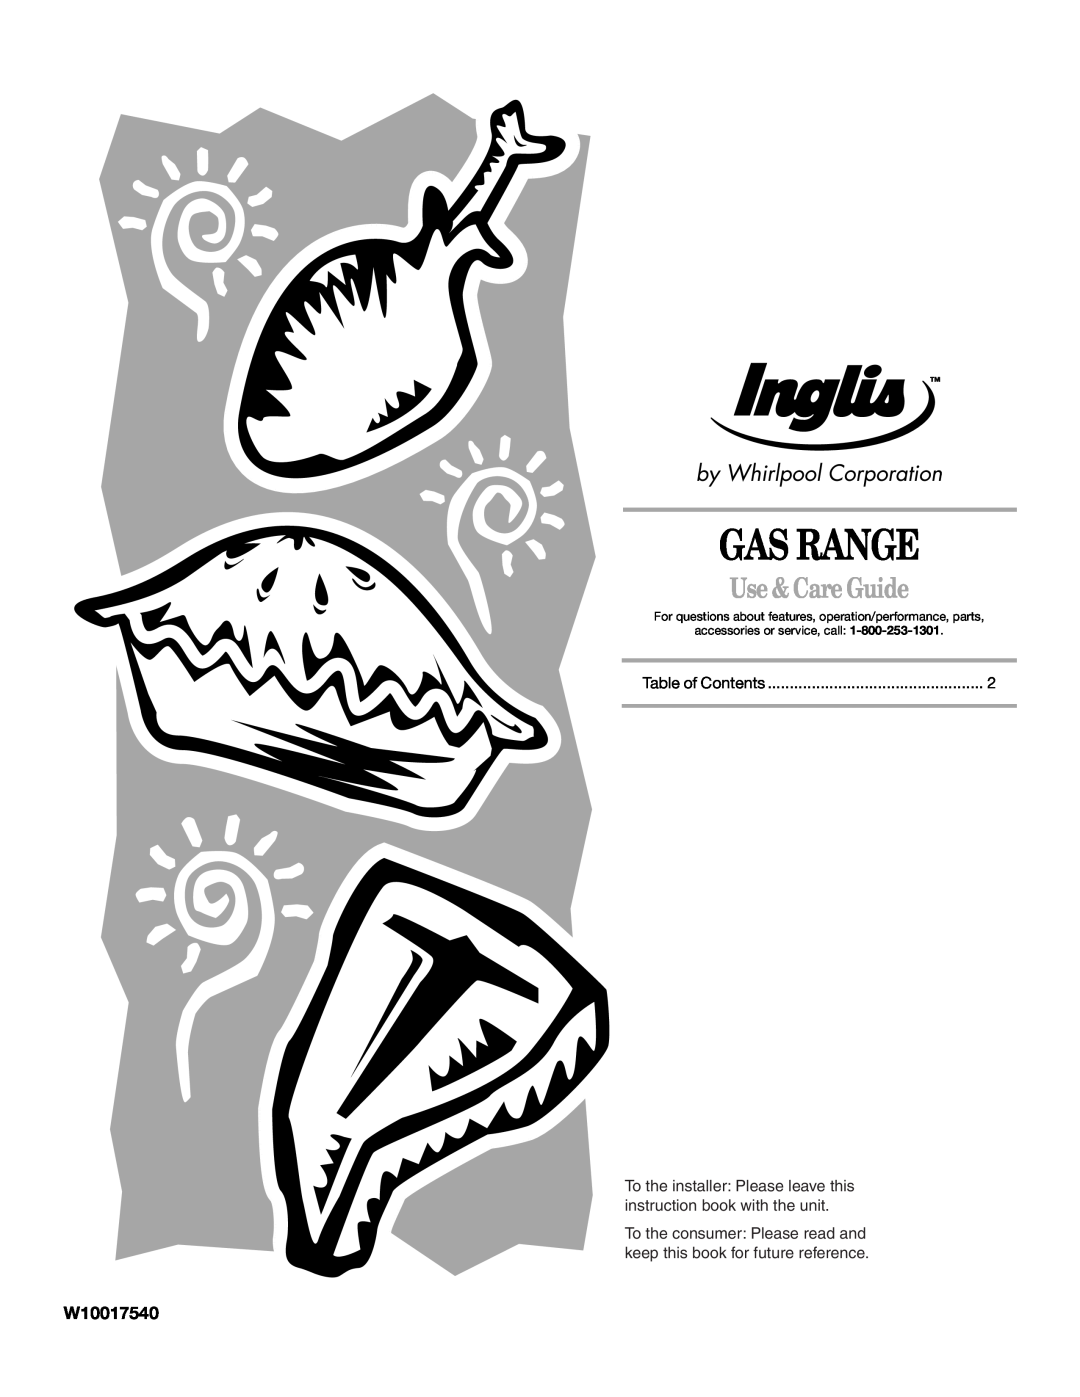 Whirlpool IGS325RQ2 manual Gas Range, Use & Care Guide, W10017540, accessories or service, call 